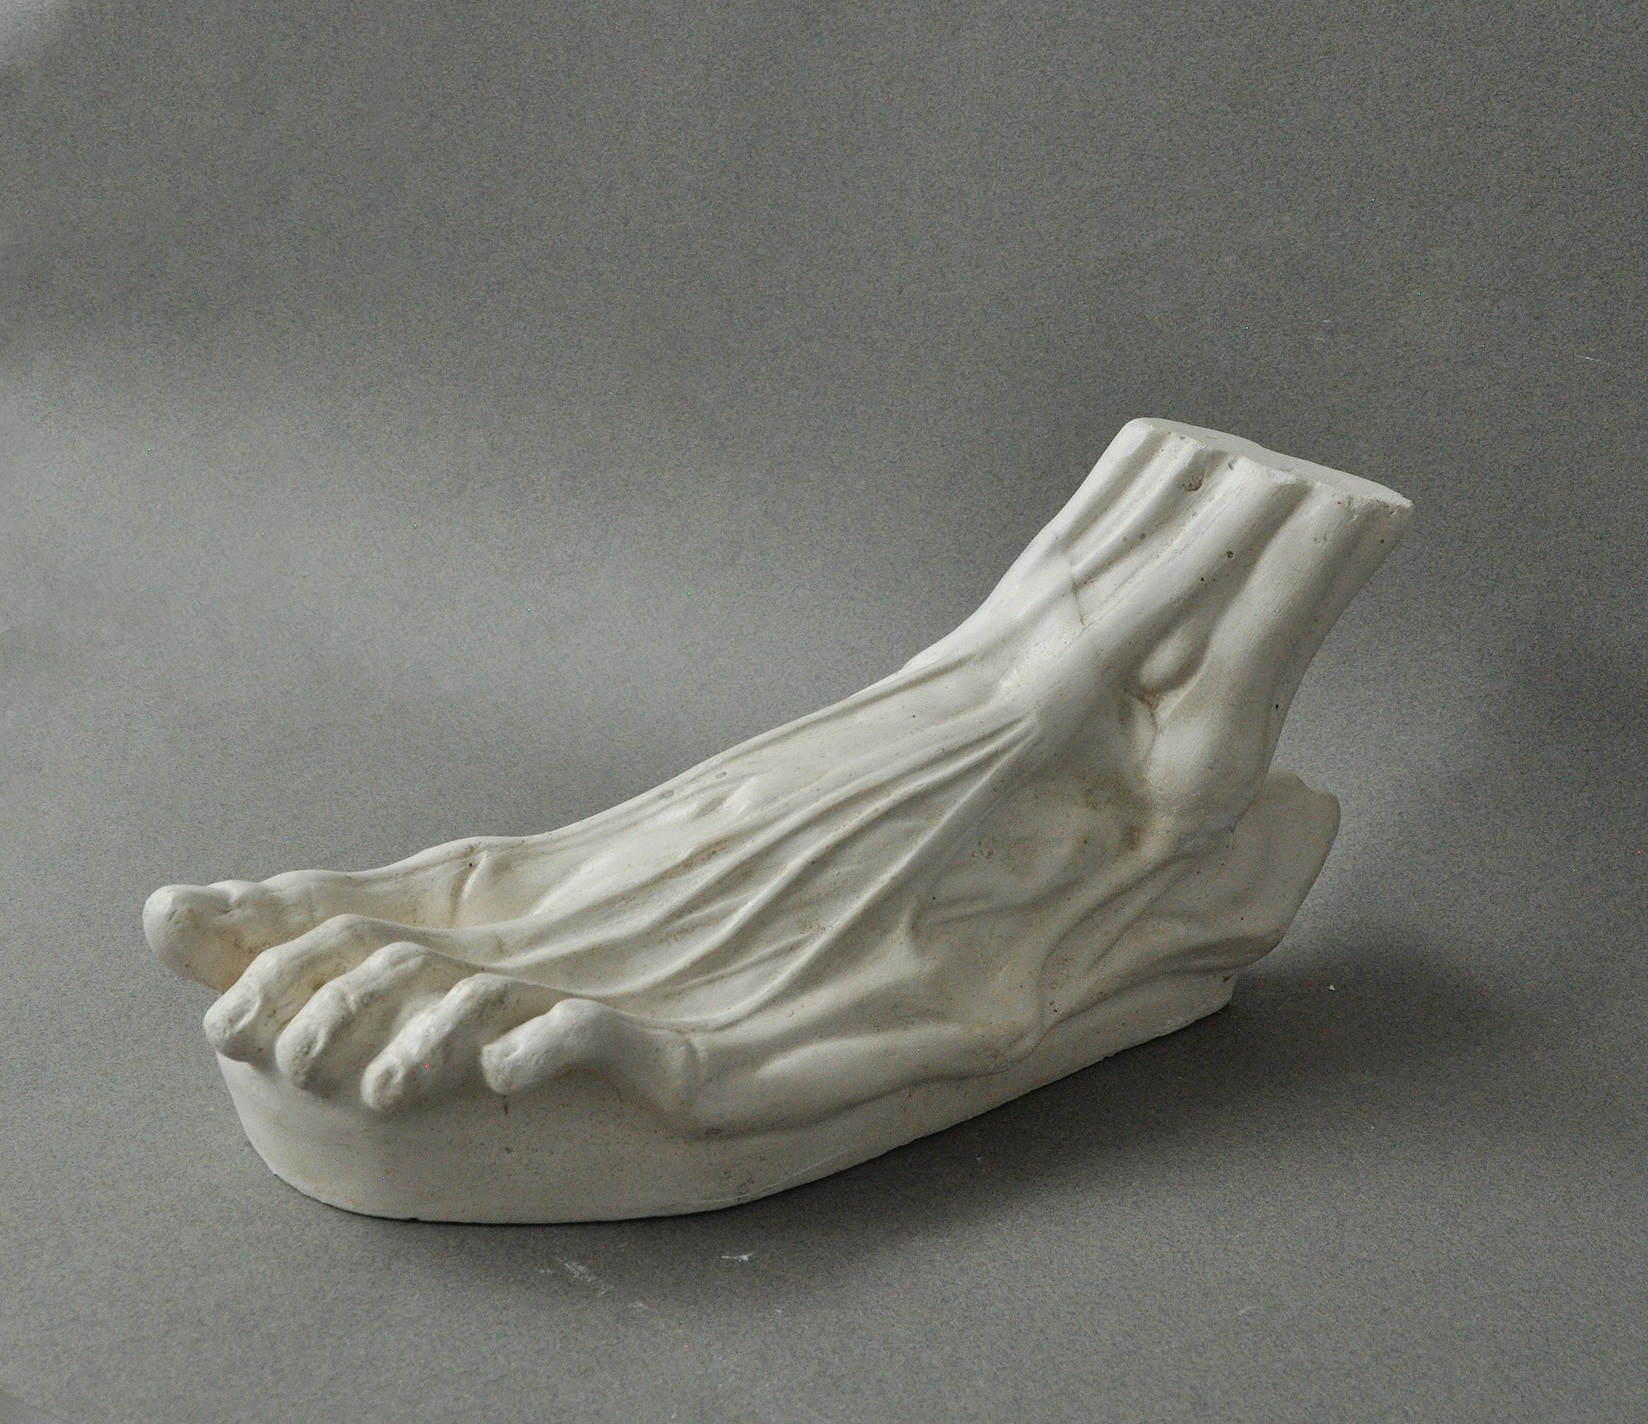 Plaster cast of anatomical foot, écorché foot used for learning the anatomy of the foot